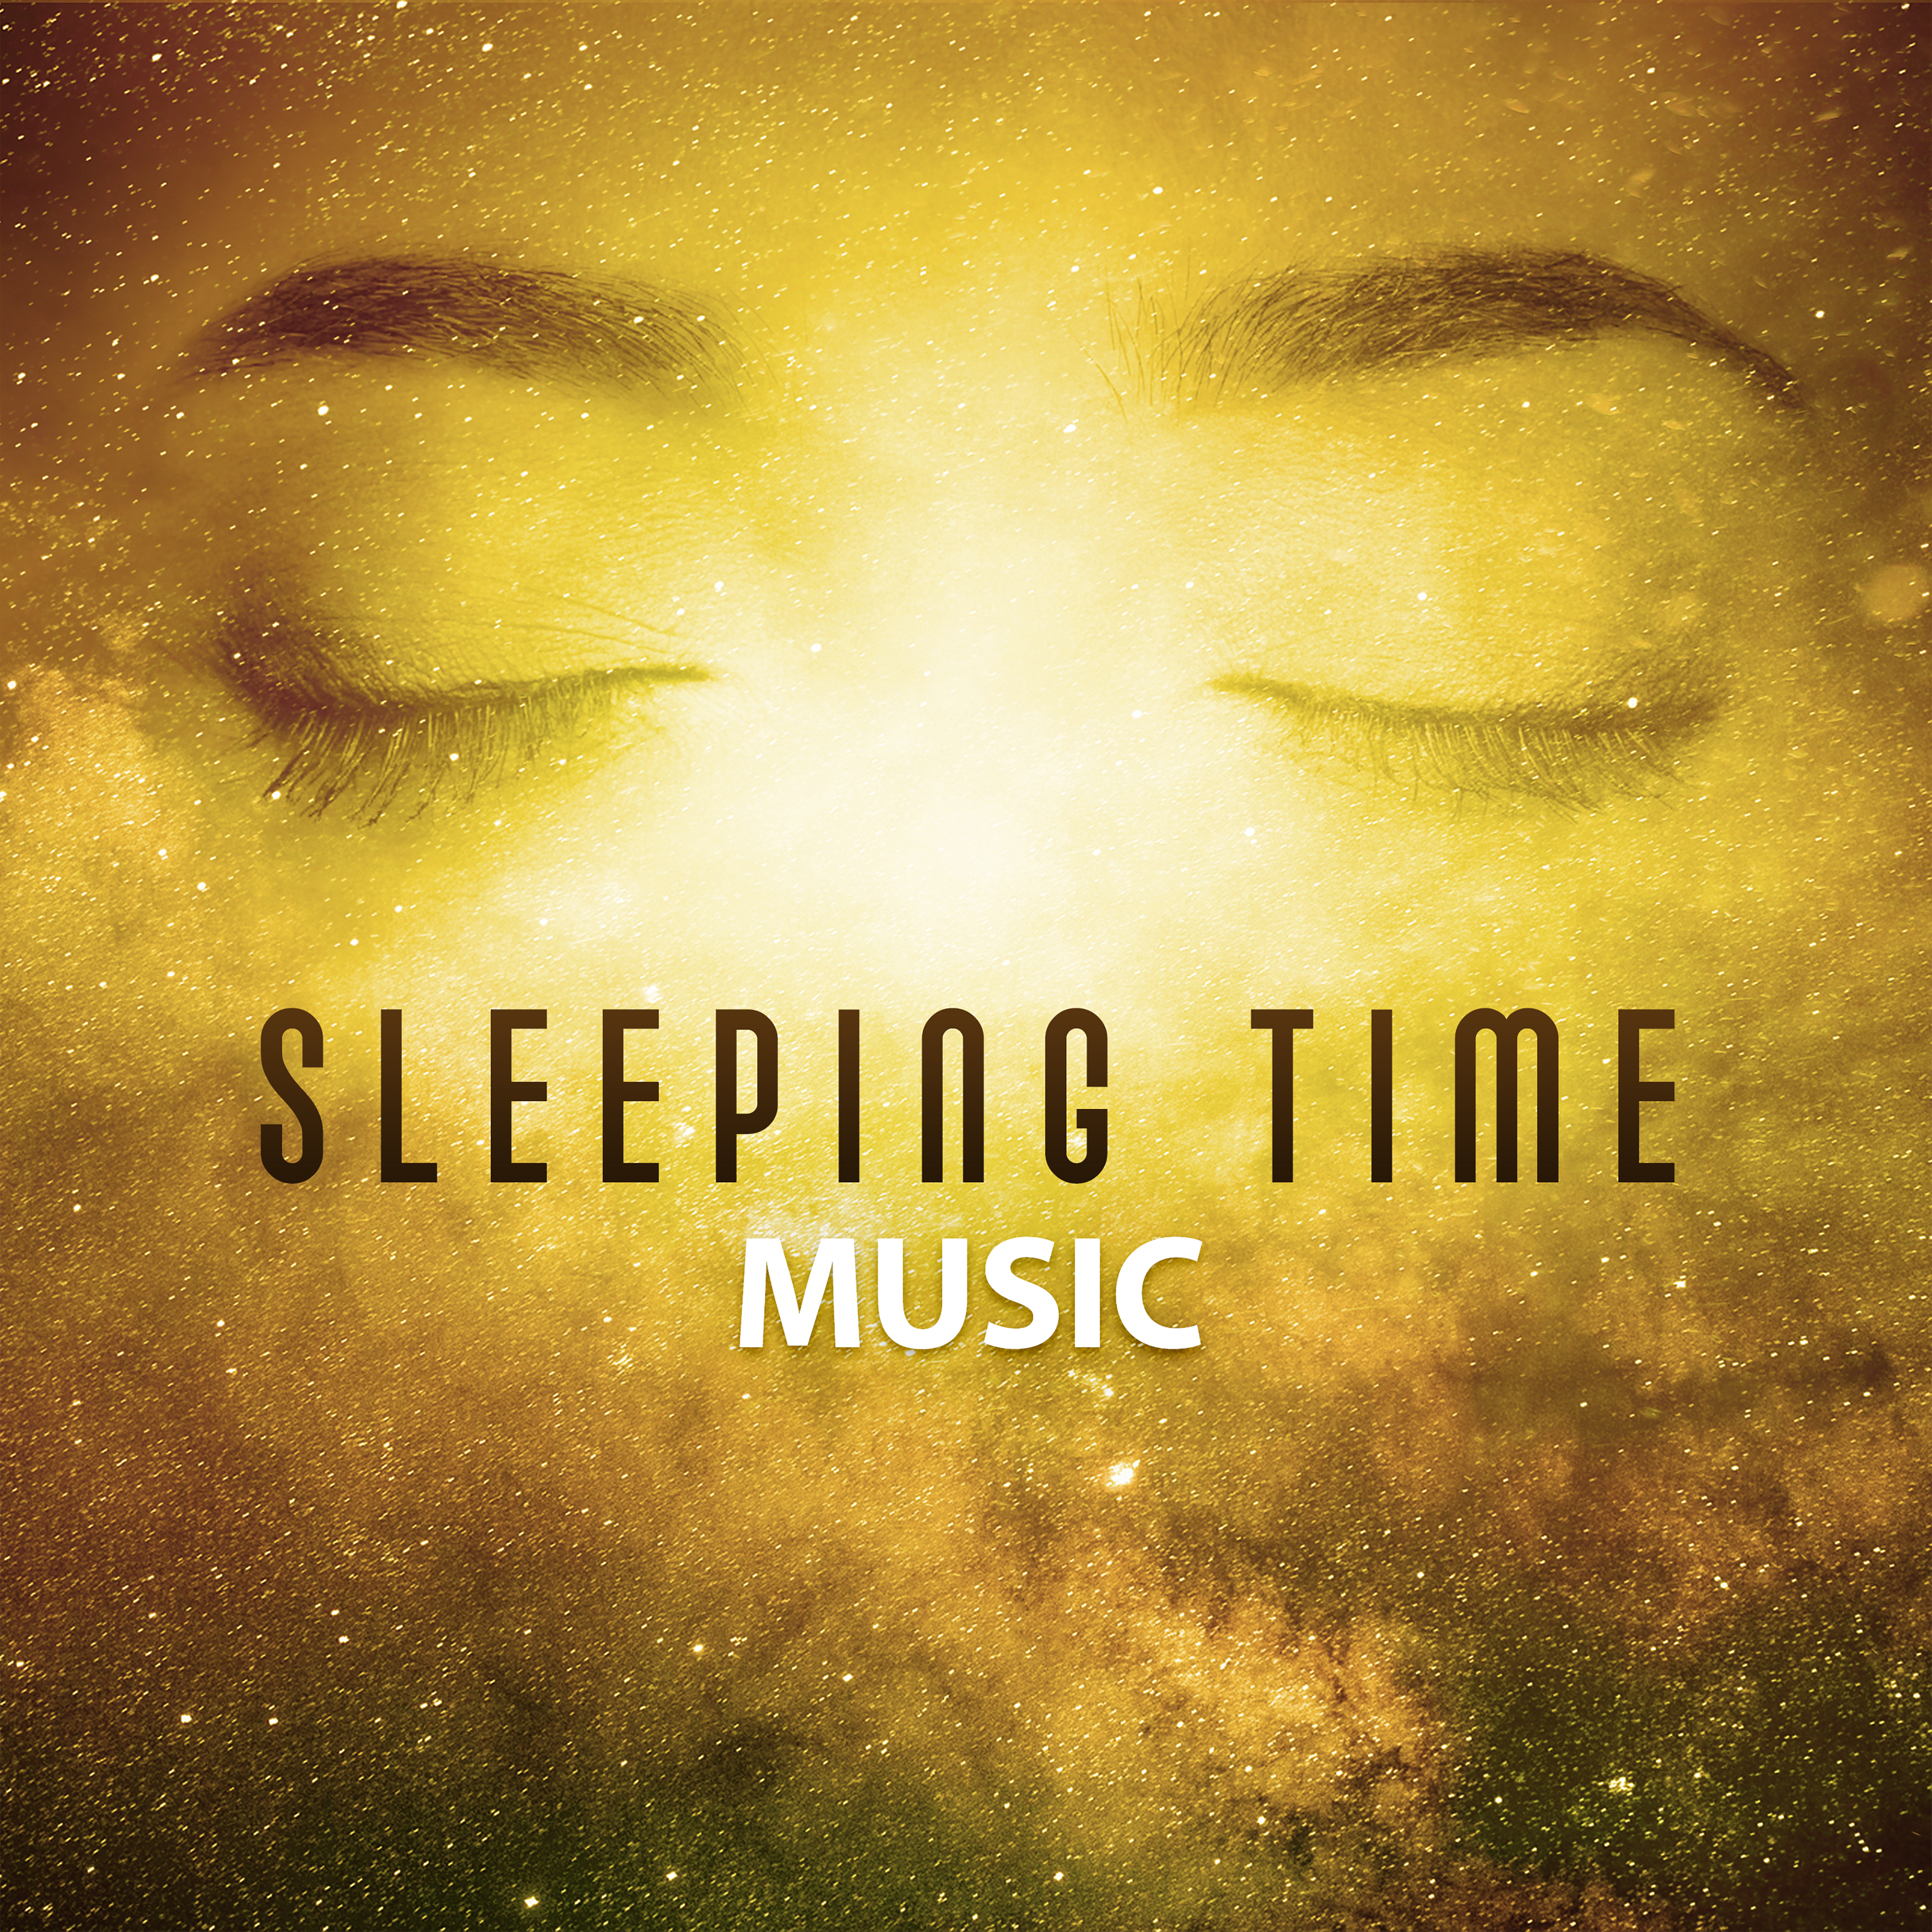 Sleeping Time Music  Relaxing Music, The Best for Falling Asleep, Helpful for Relax Before Sleep